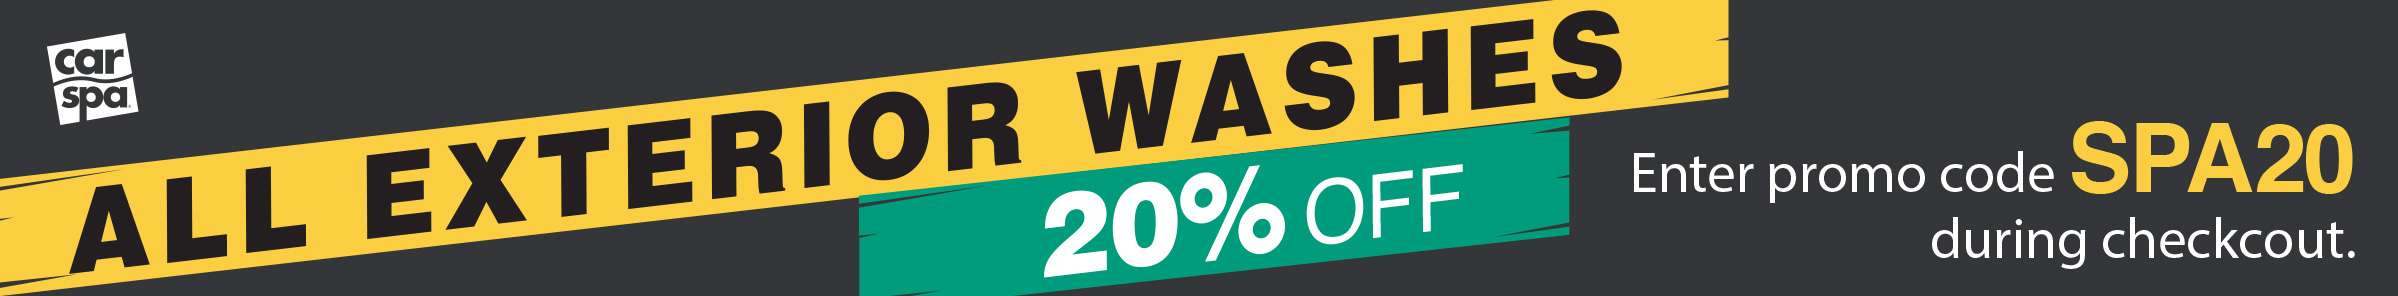 All Exterior Washes 20% off, Enter Promo Code SPA20 during checkout